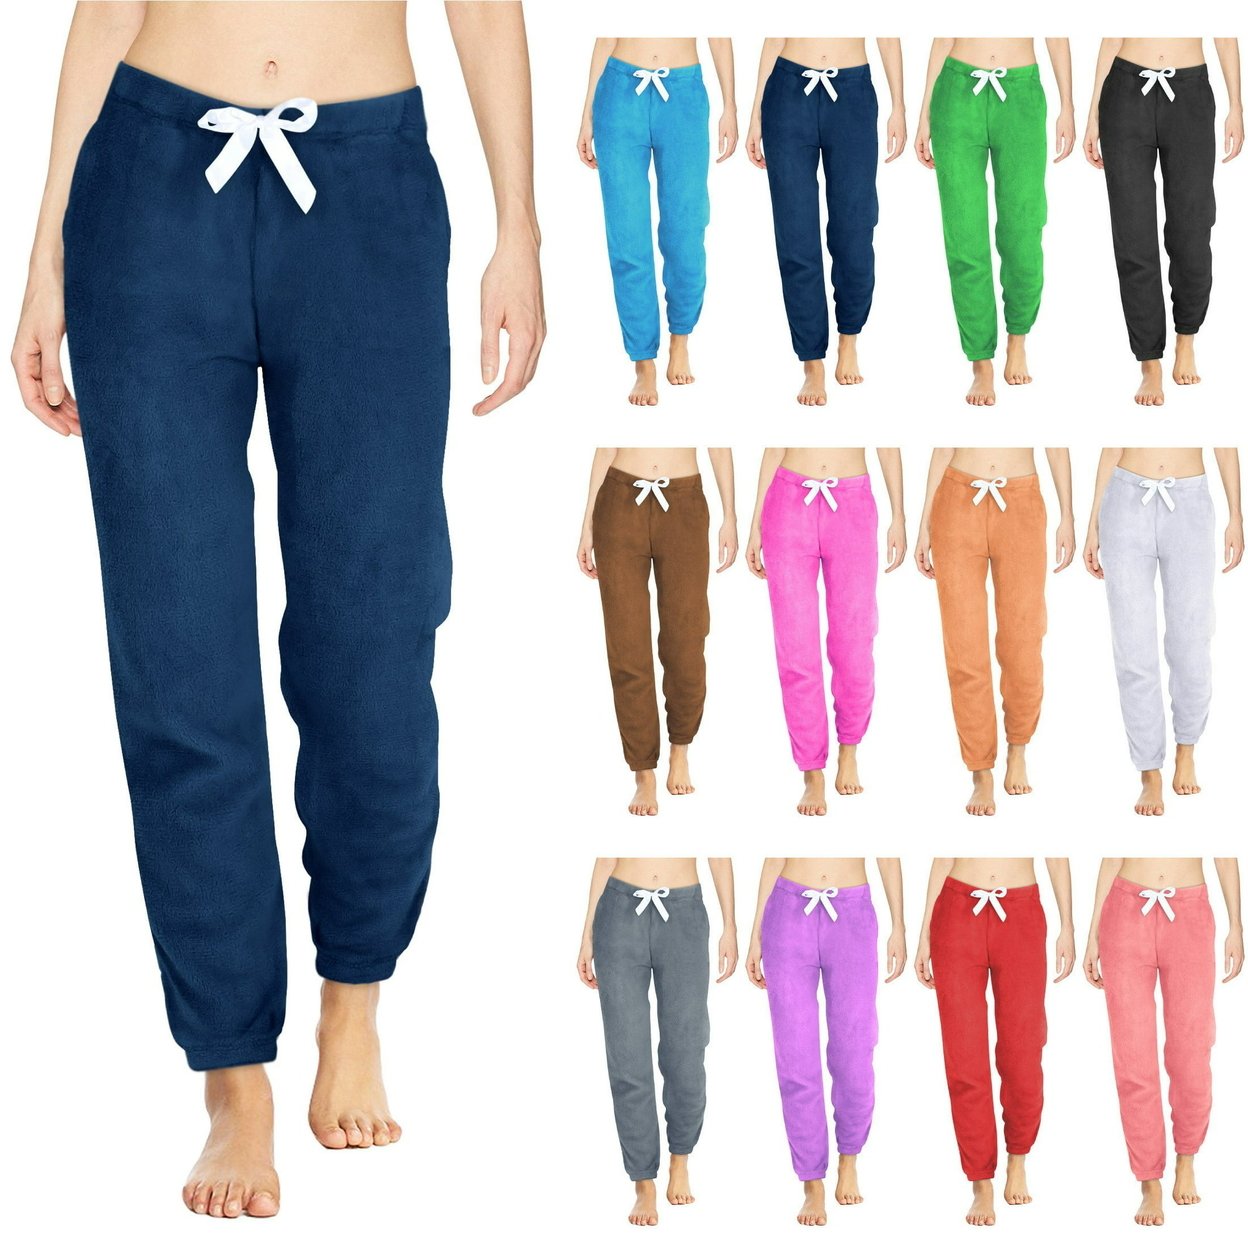 Multi-Pack: Women's Solid & Printed Ultra-Soft Comfy Stretch Micro-Fleece Pajama Lounge Pants - 1-pack, Large, Animal